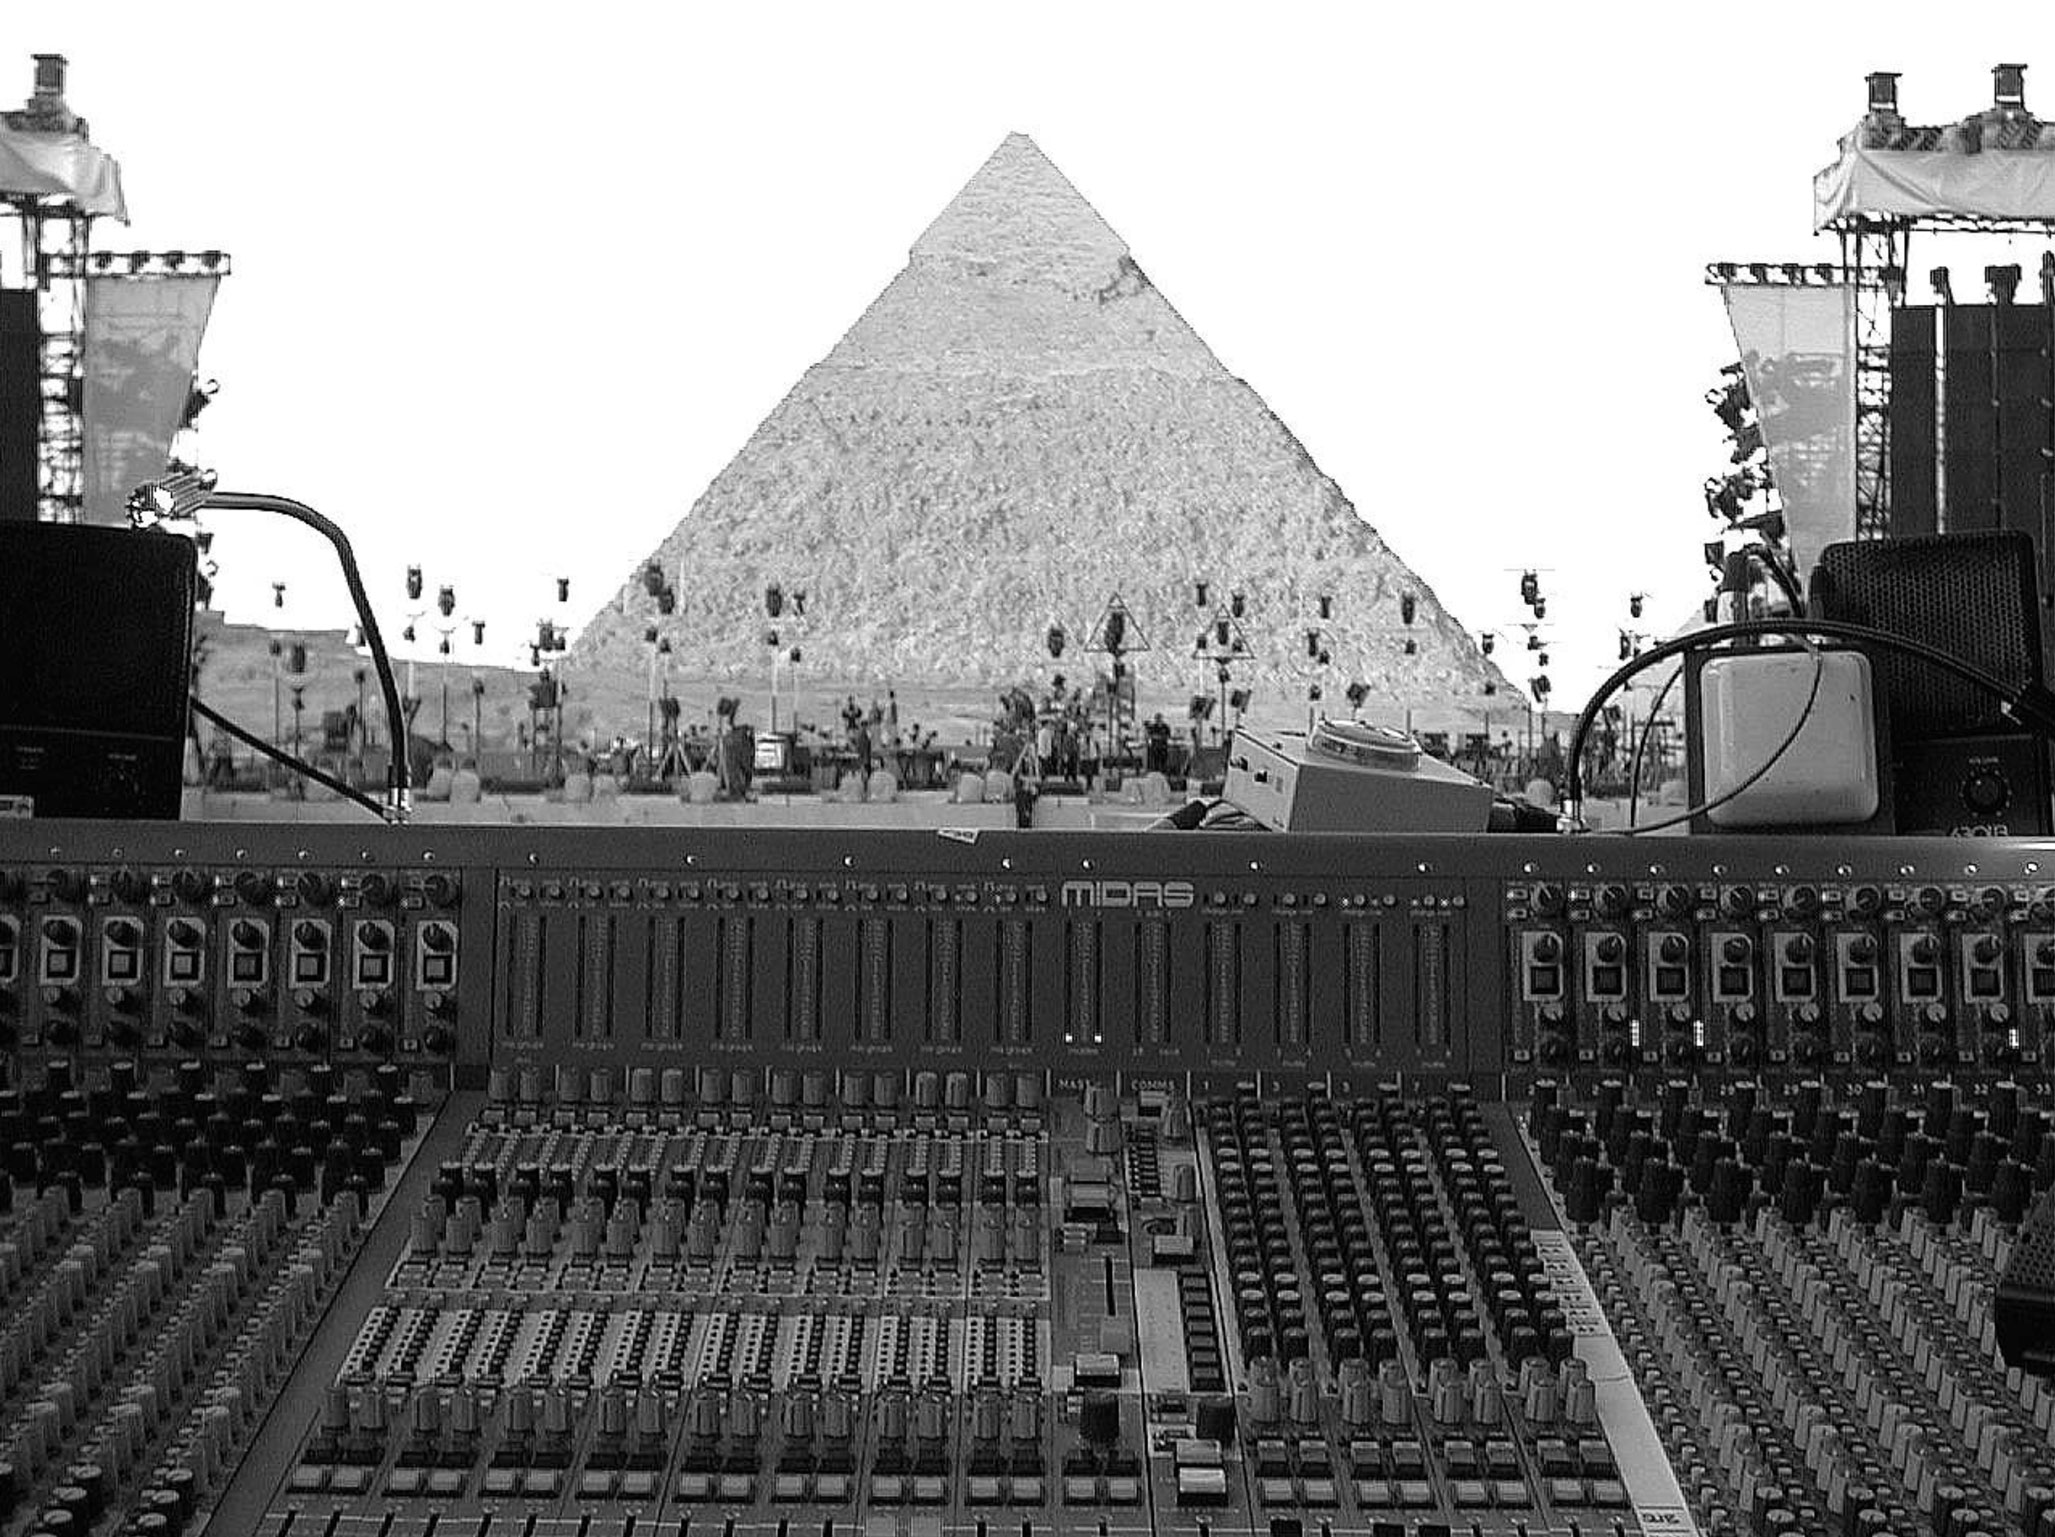 black and white photo of soundboard with Egyptian pyramid from a Jean-Michel Jarre show in background, courtesy Clair Global